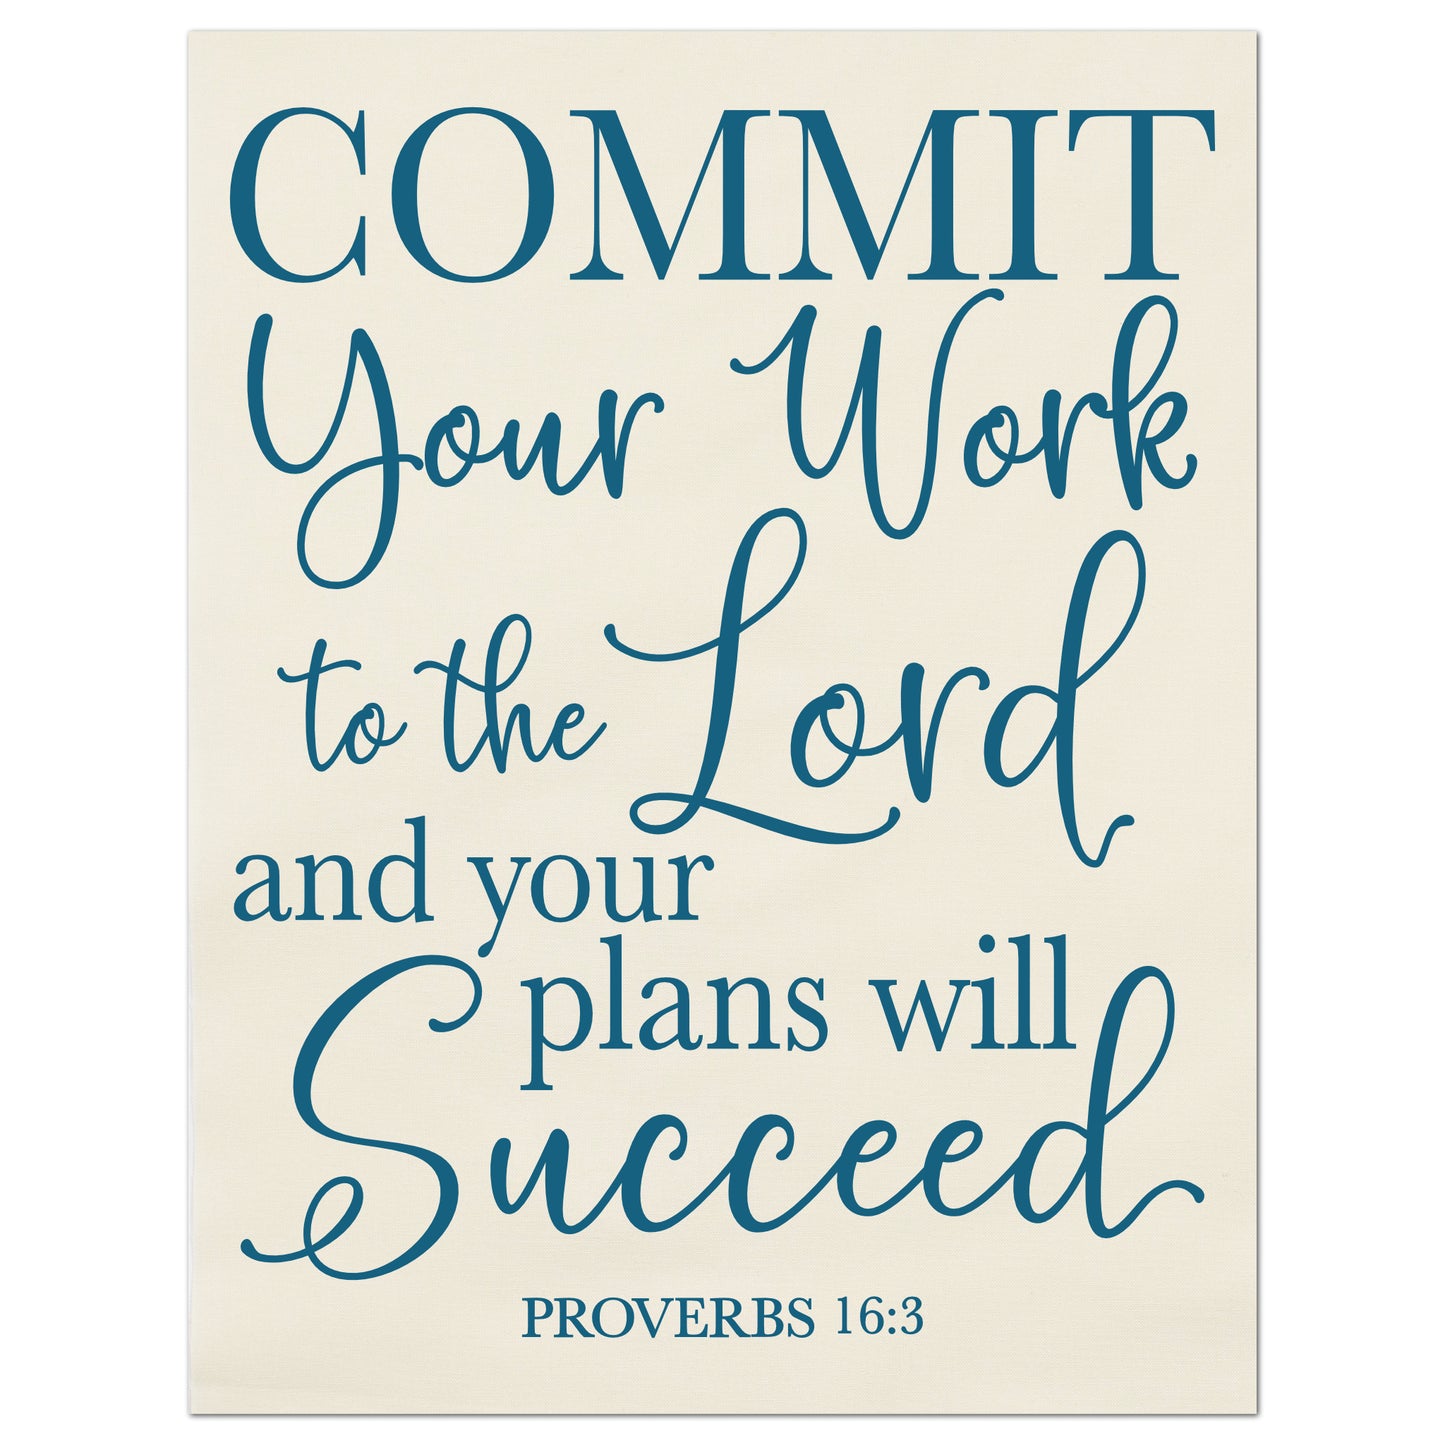 Commit you work to the Lord and you plans will succeed. - Proverbs 16:3, Fabric Panel Print, Quilt Block, Scripture Fabric